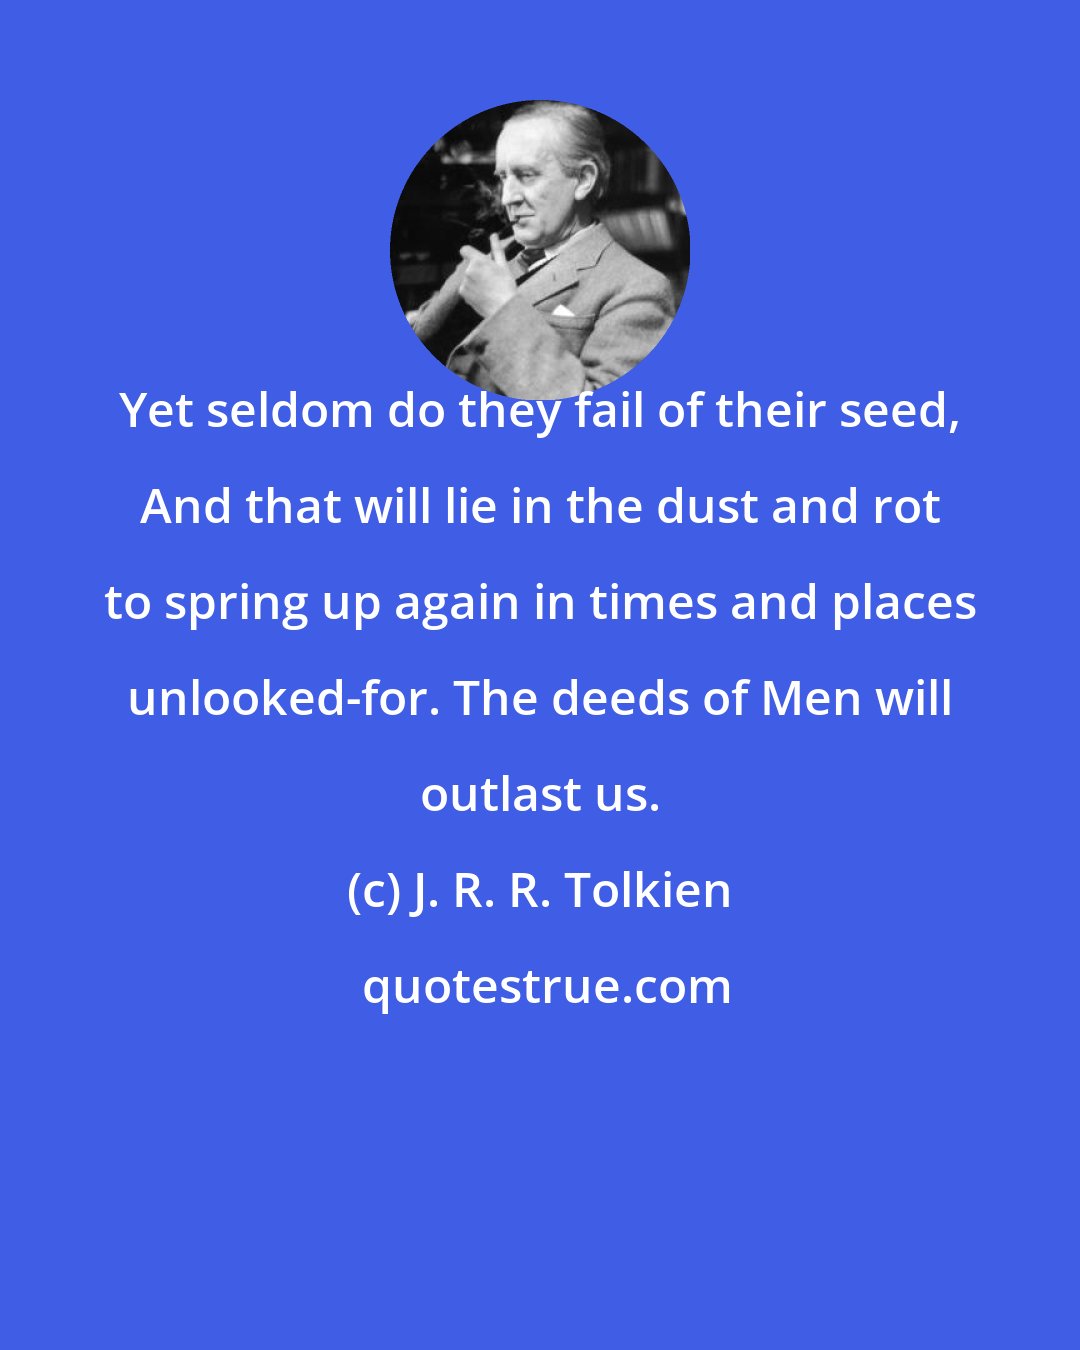 J. R. R. Tolkien: Yet seldom do they fail of their seed, And that will lie in the dust and rot to spring up again in times and places unlooked-for. The deeds of Men will outlast us.